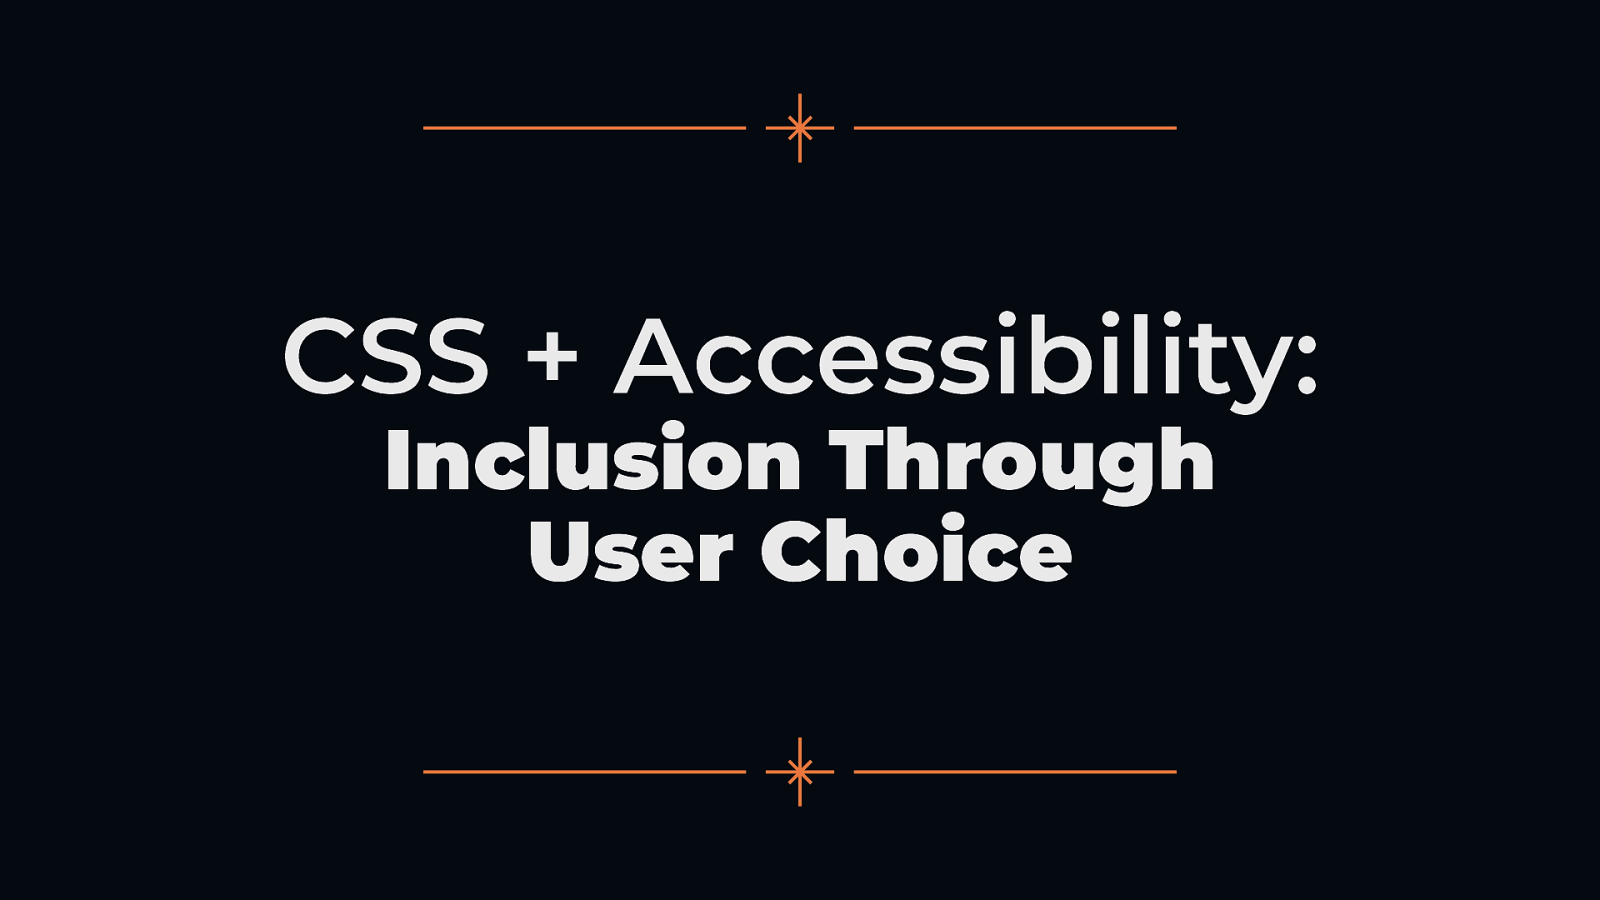 CSS + Accessibility: Inclusion Through User Choice